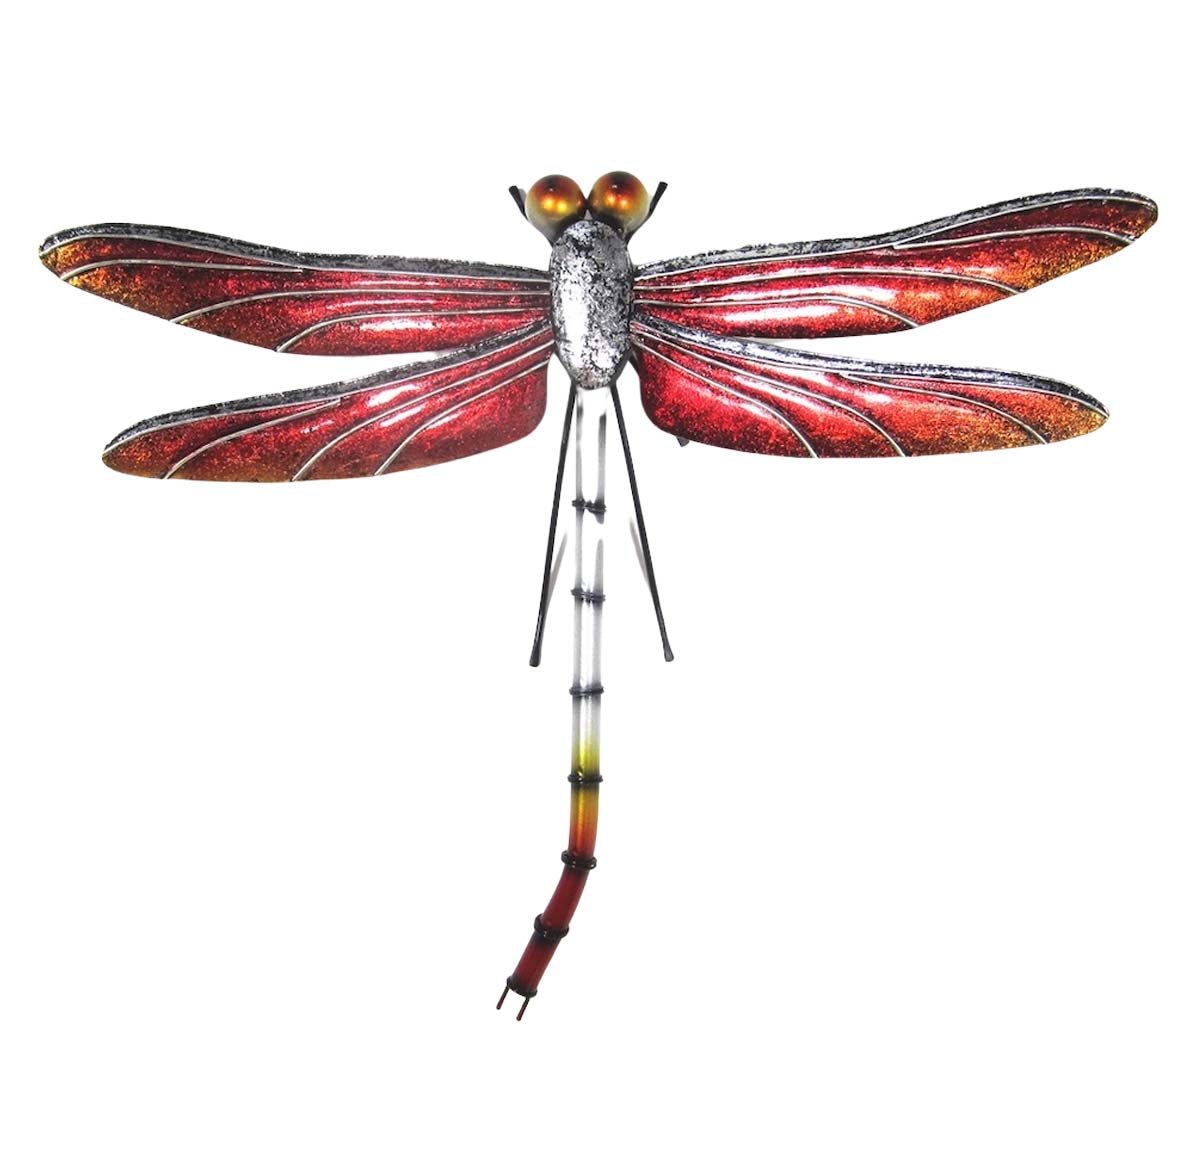 Dragonfly Metal Art Wall Hanging - Red | Wall Art | Home Decor